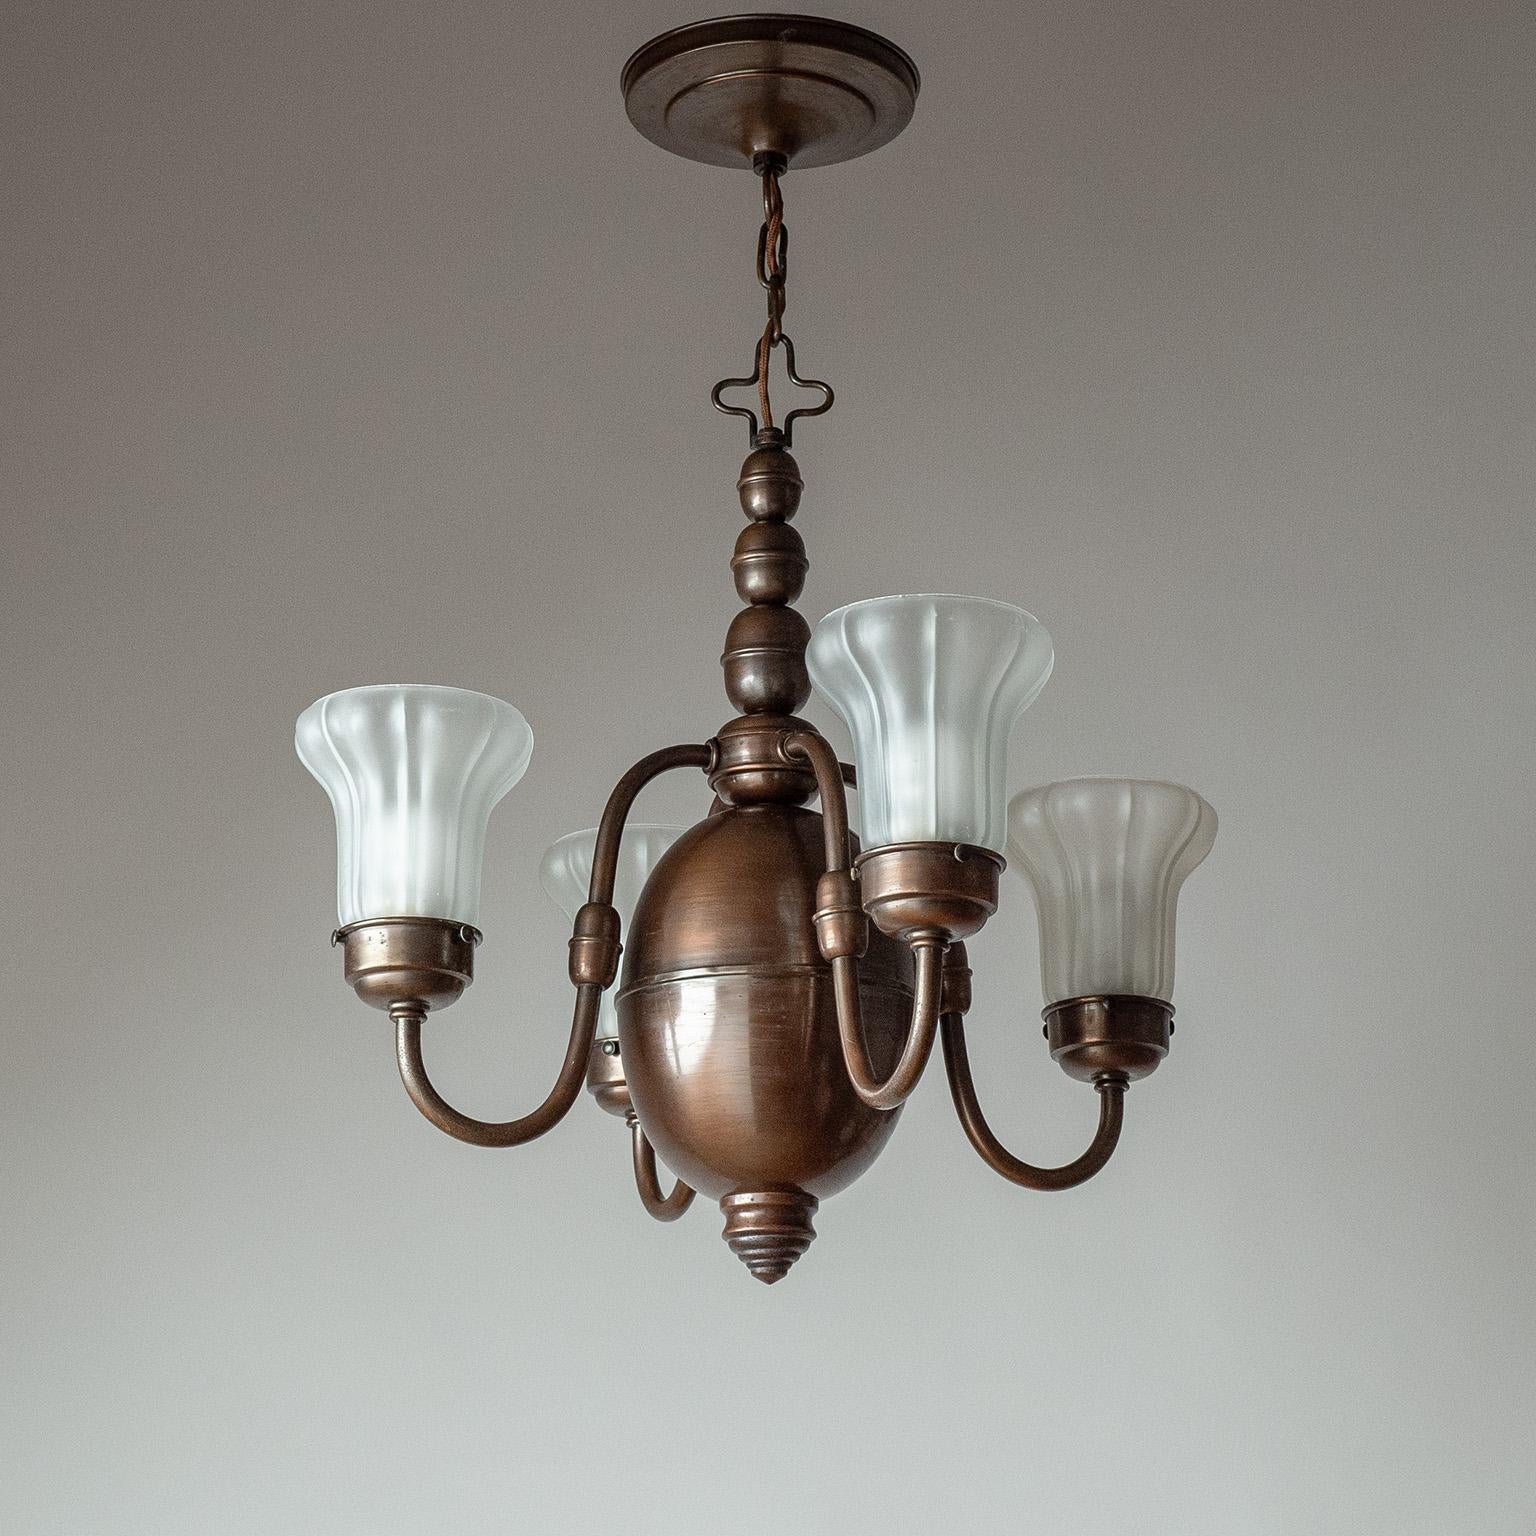 Lovely Swedish Art Deco copper chandelier with satin glass diffusers from the 1930s. Bulbous body in patinated copper with delicate floral-shaped glass ‚tulips‘, which are acid-etched for a satin finish. Four original brass and ceramic E27 sockets